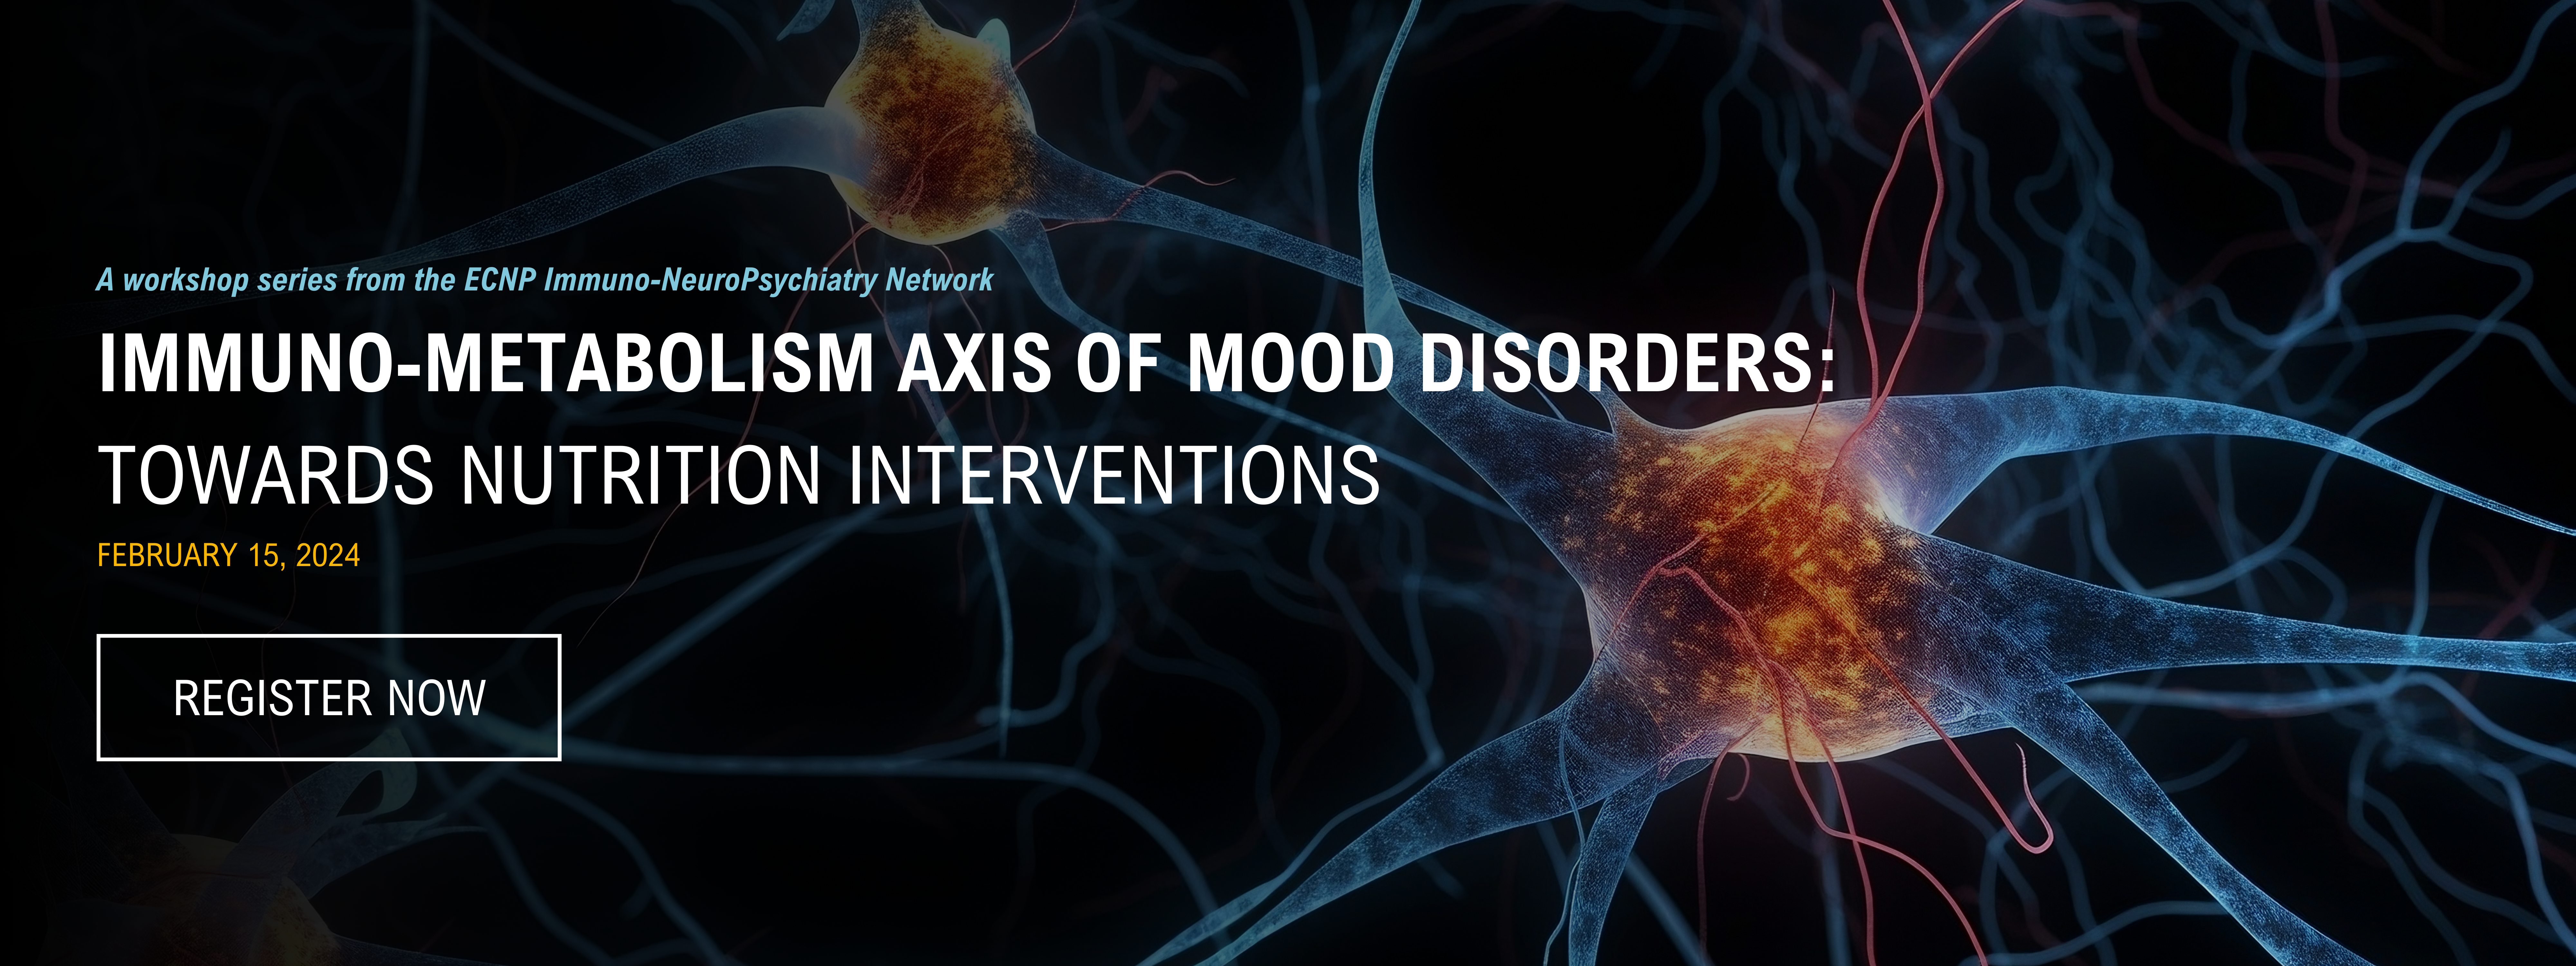 Image reads: Immuno-Metabolism Axis of Mood Disorders:<br />
Towards Nutrition Interventions. Taking place on February 15, 2023.